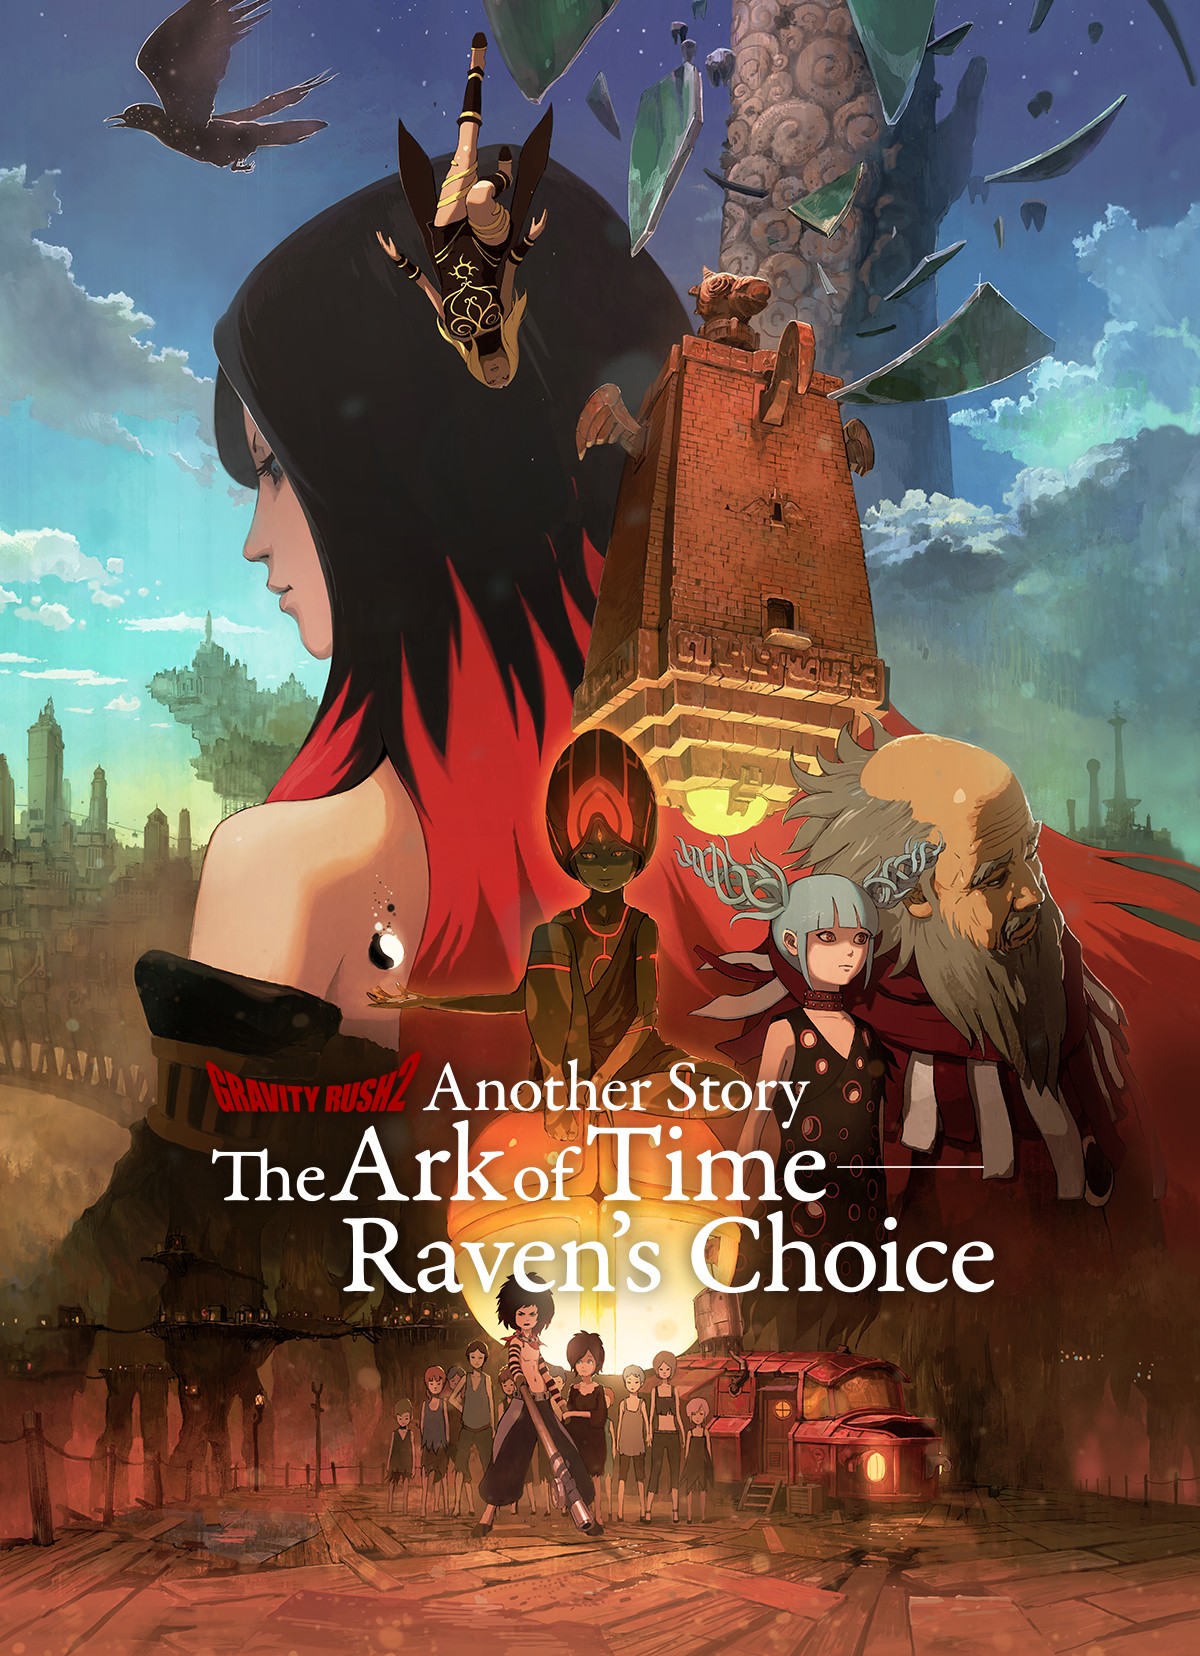 Gravity Rush 2: Another Story - The Ark of Time: Raven's Choice